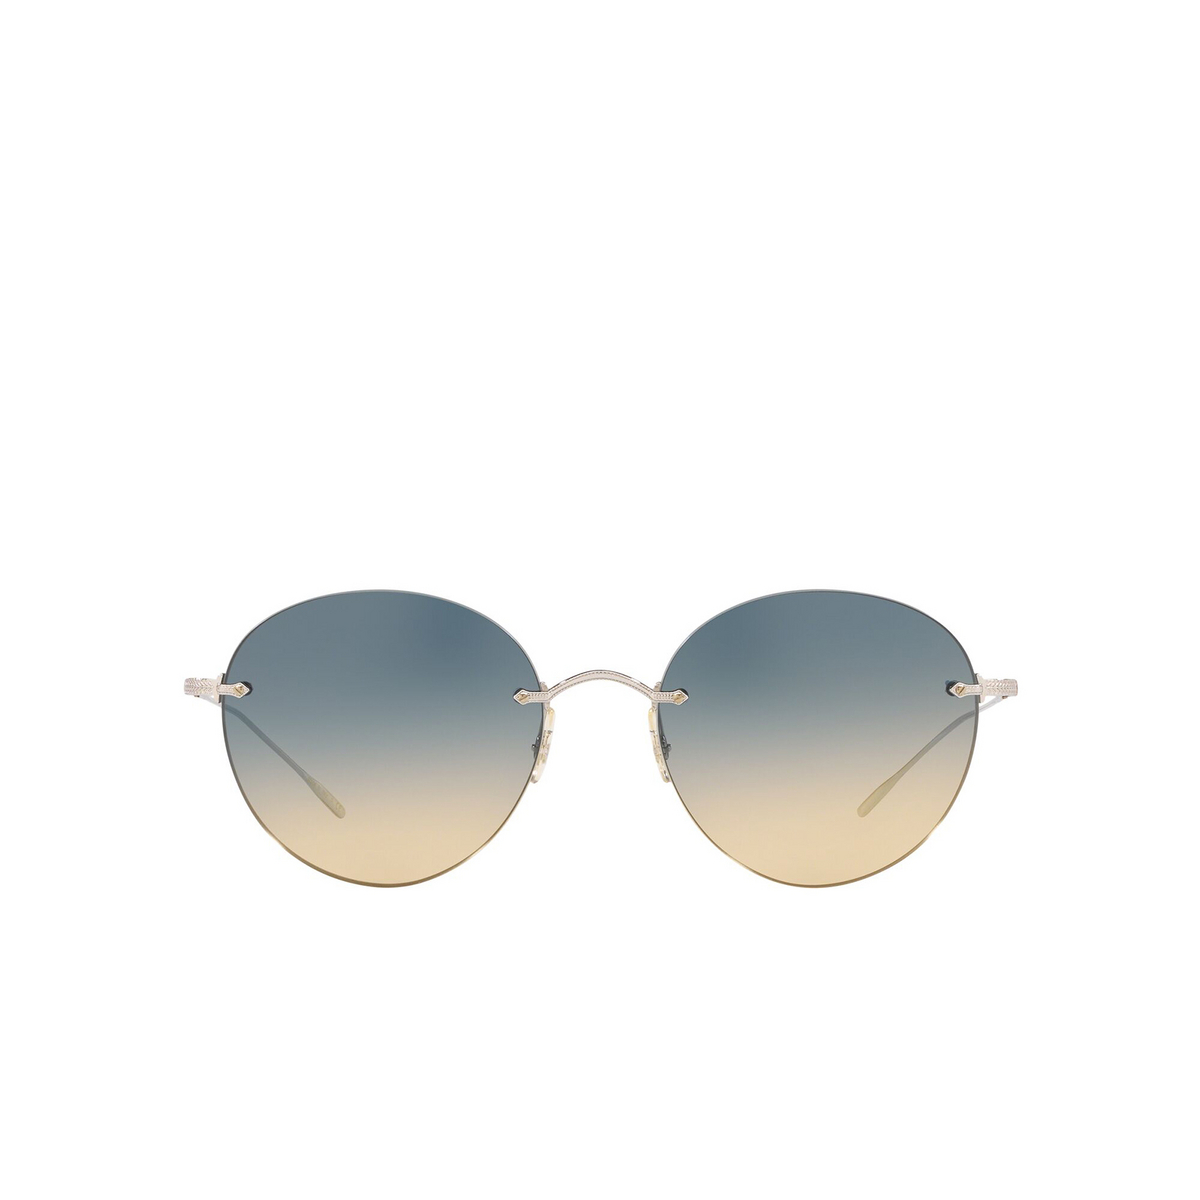 Oliver Peoples® Round Sunglasses: Coliena OV1264S color Silver 503679 - front view.